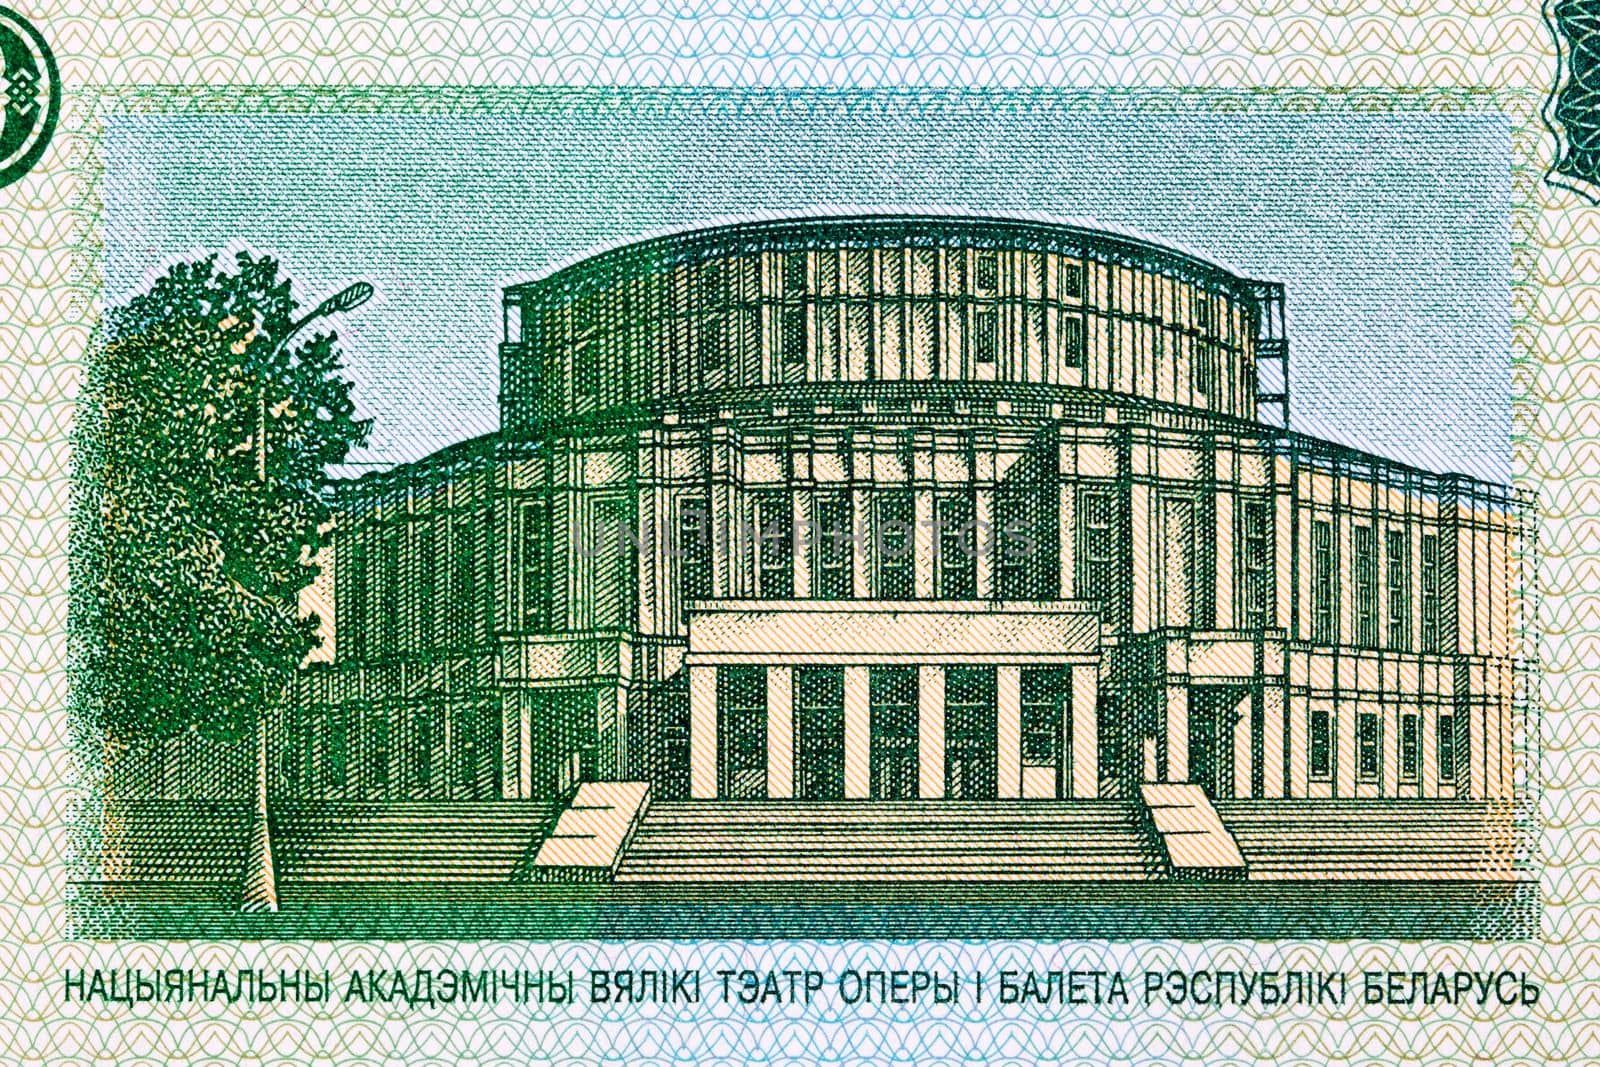 The Grand Theater of Opera and Ballet from Belarusian money - Rubles